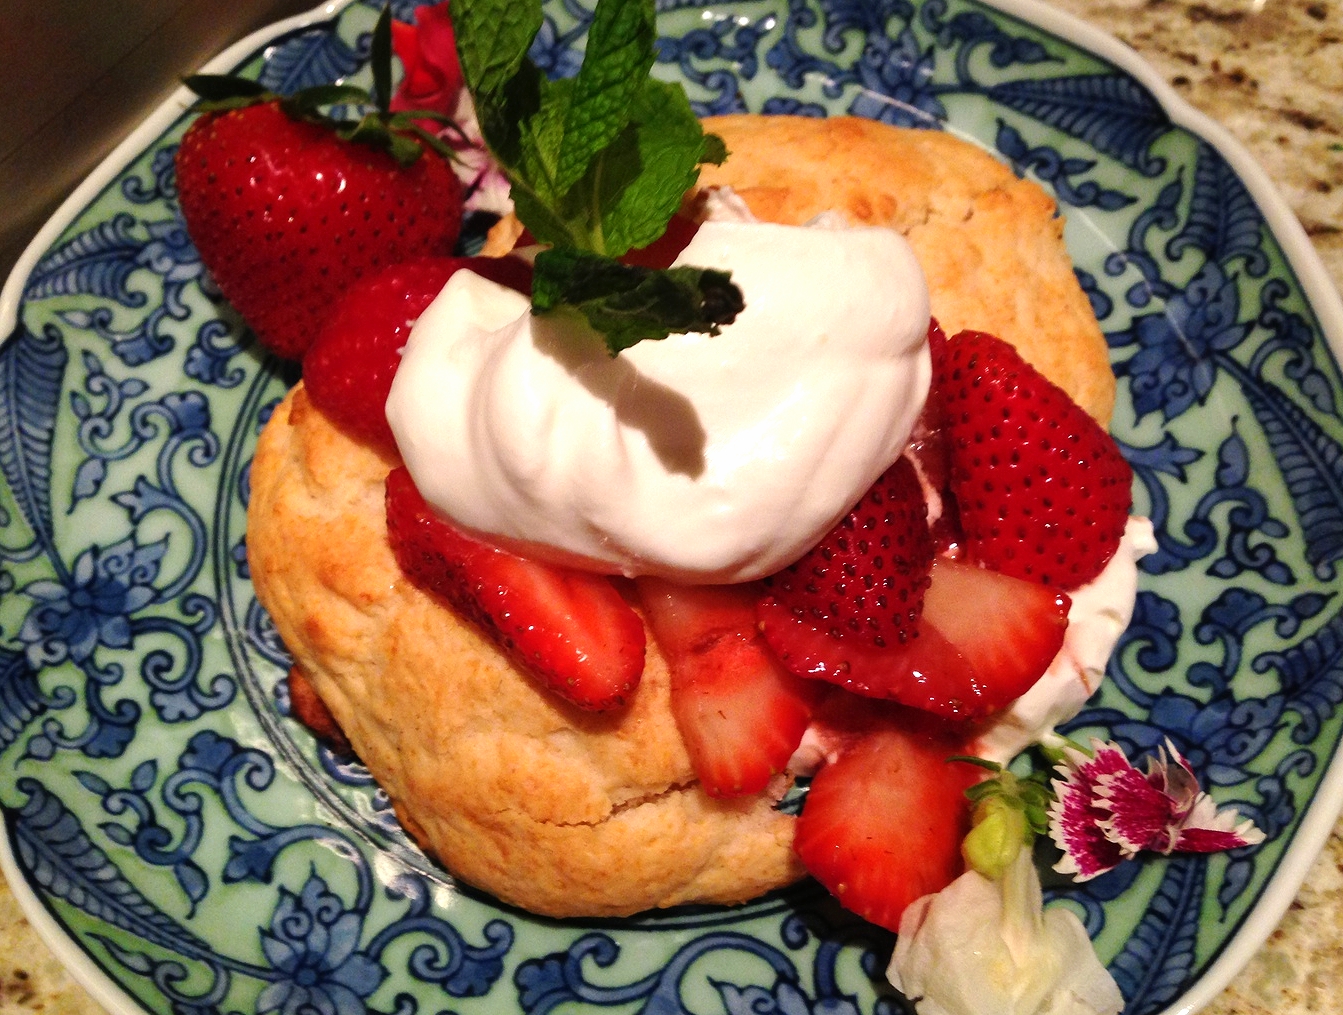 Strawberry shortcake with whipped cream and sliced strawberries